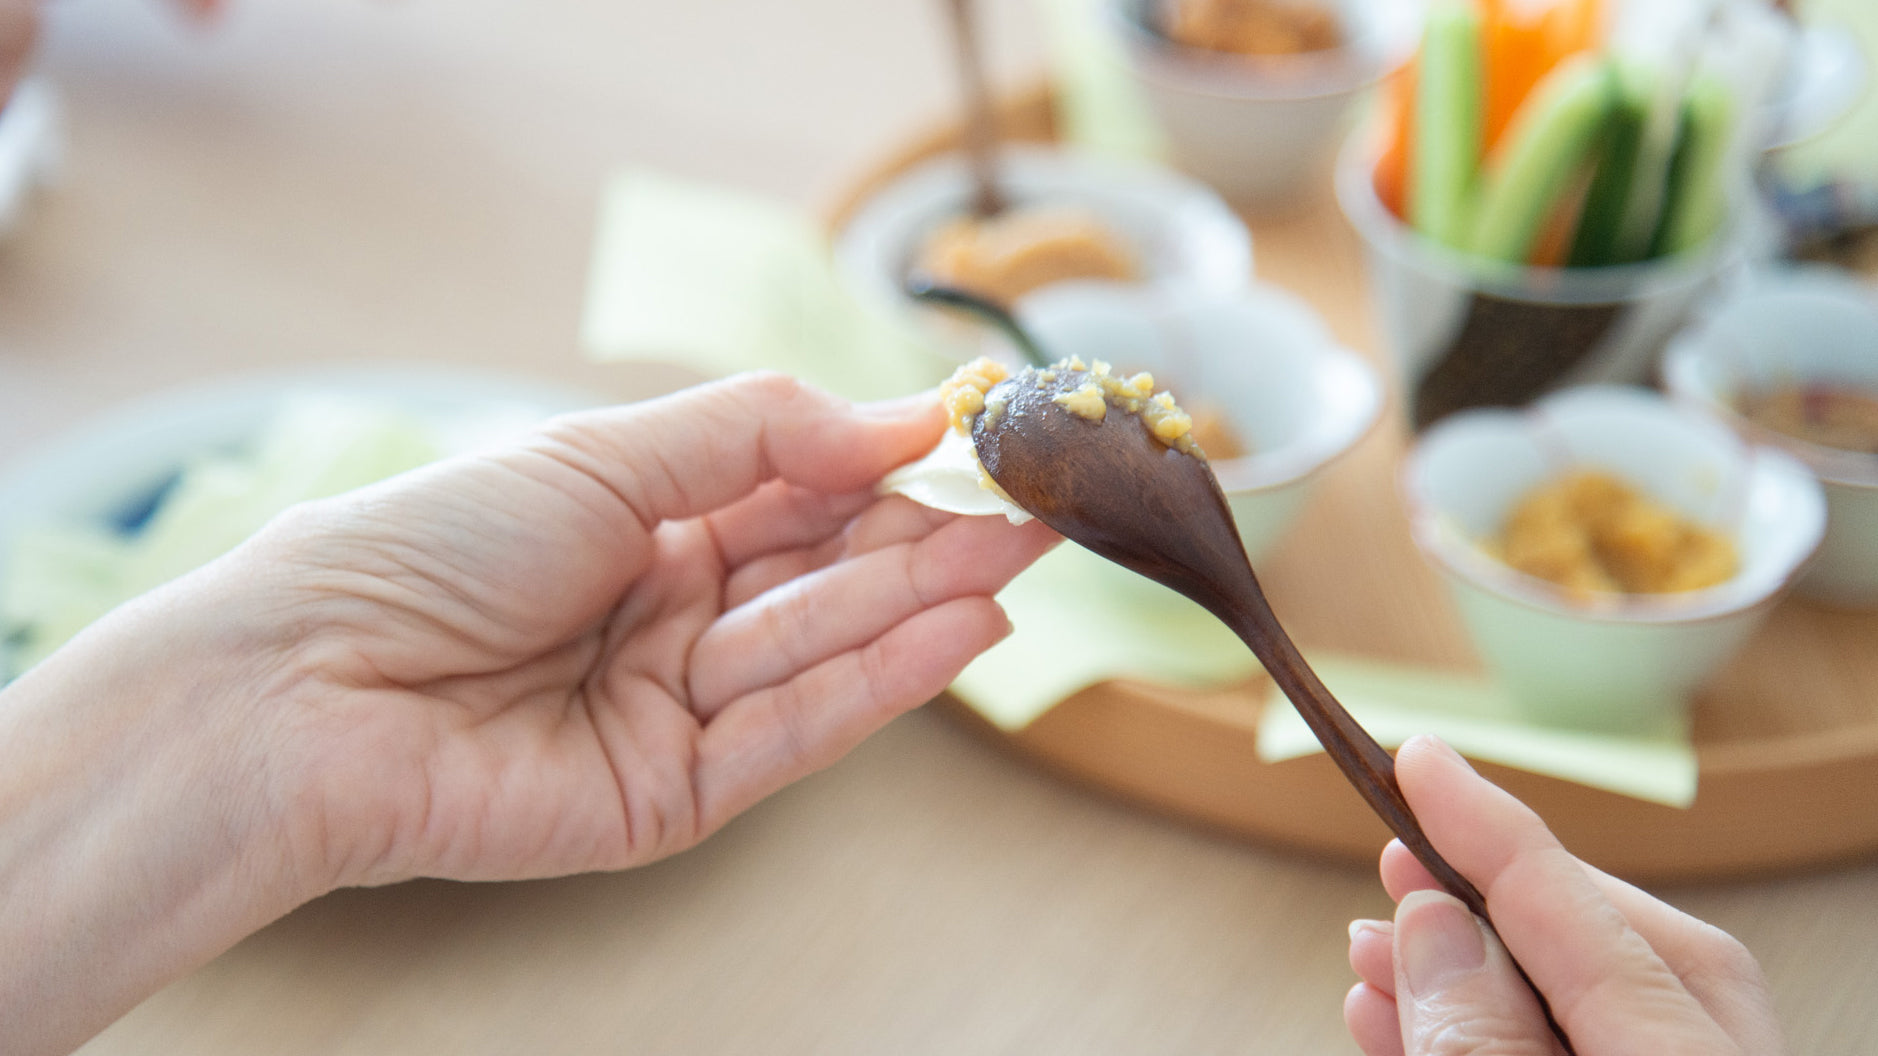 Miso Matters: An Office Tasting Event Through Japan's Flavors